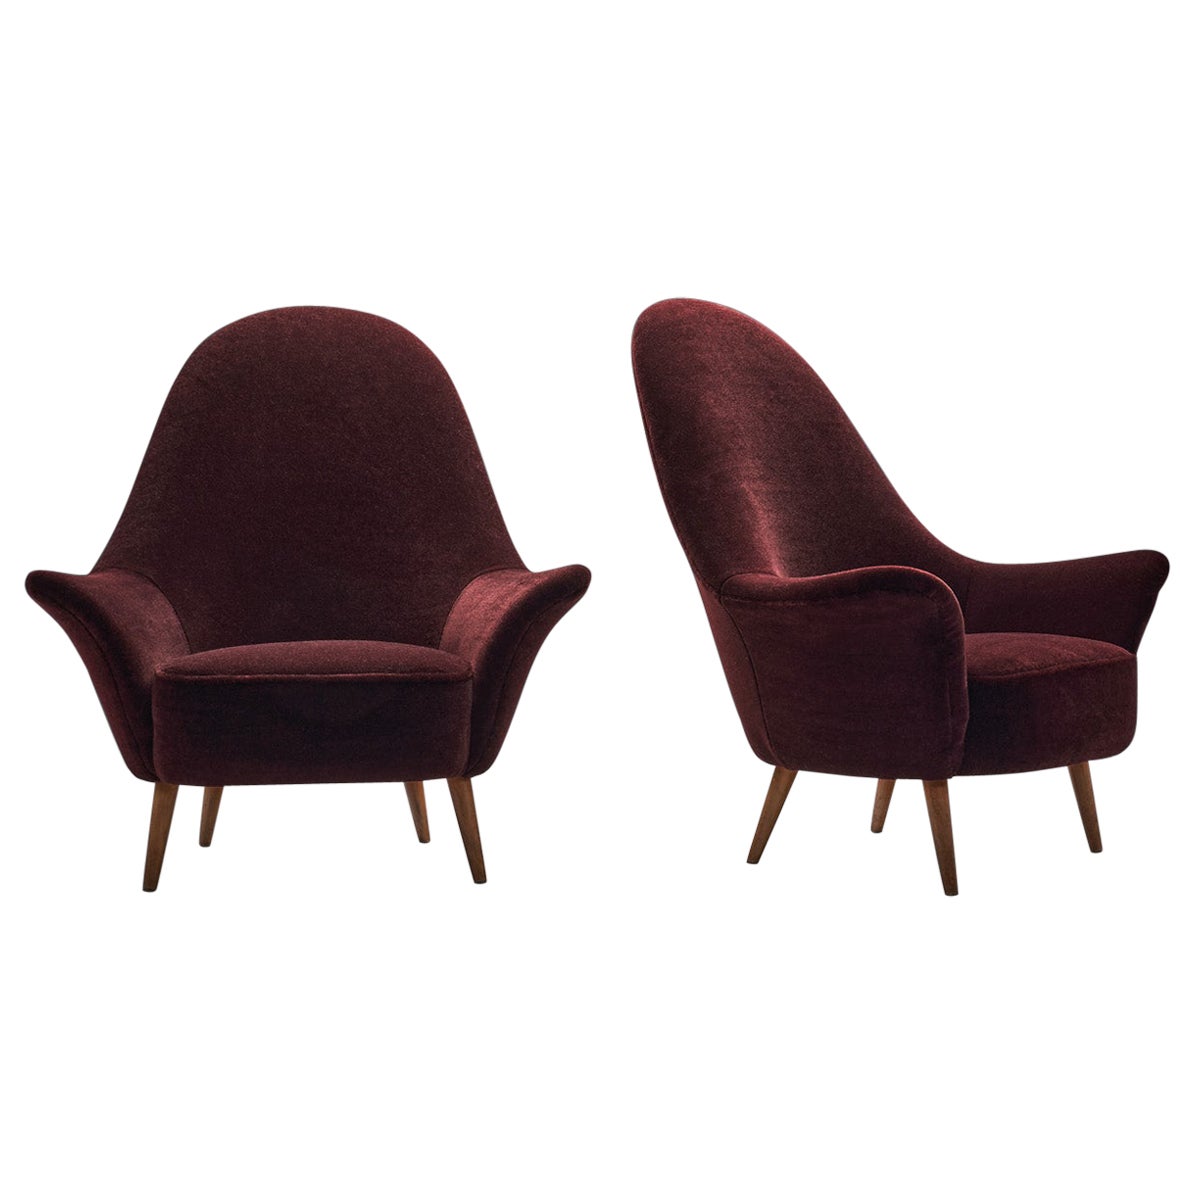 French Lounge Chairs In Aubergine Coloured Mohair, France ca 1960s For Sale